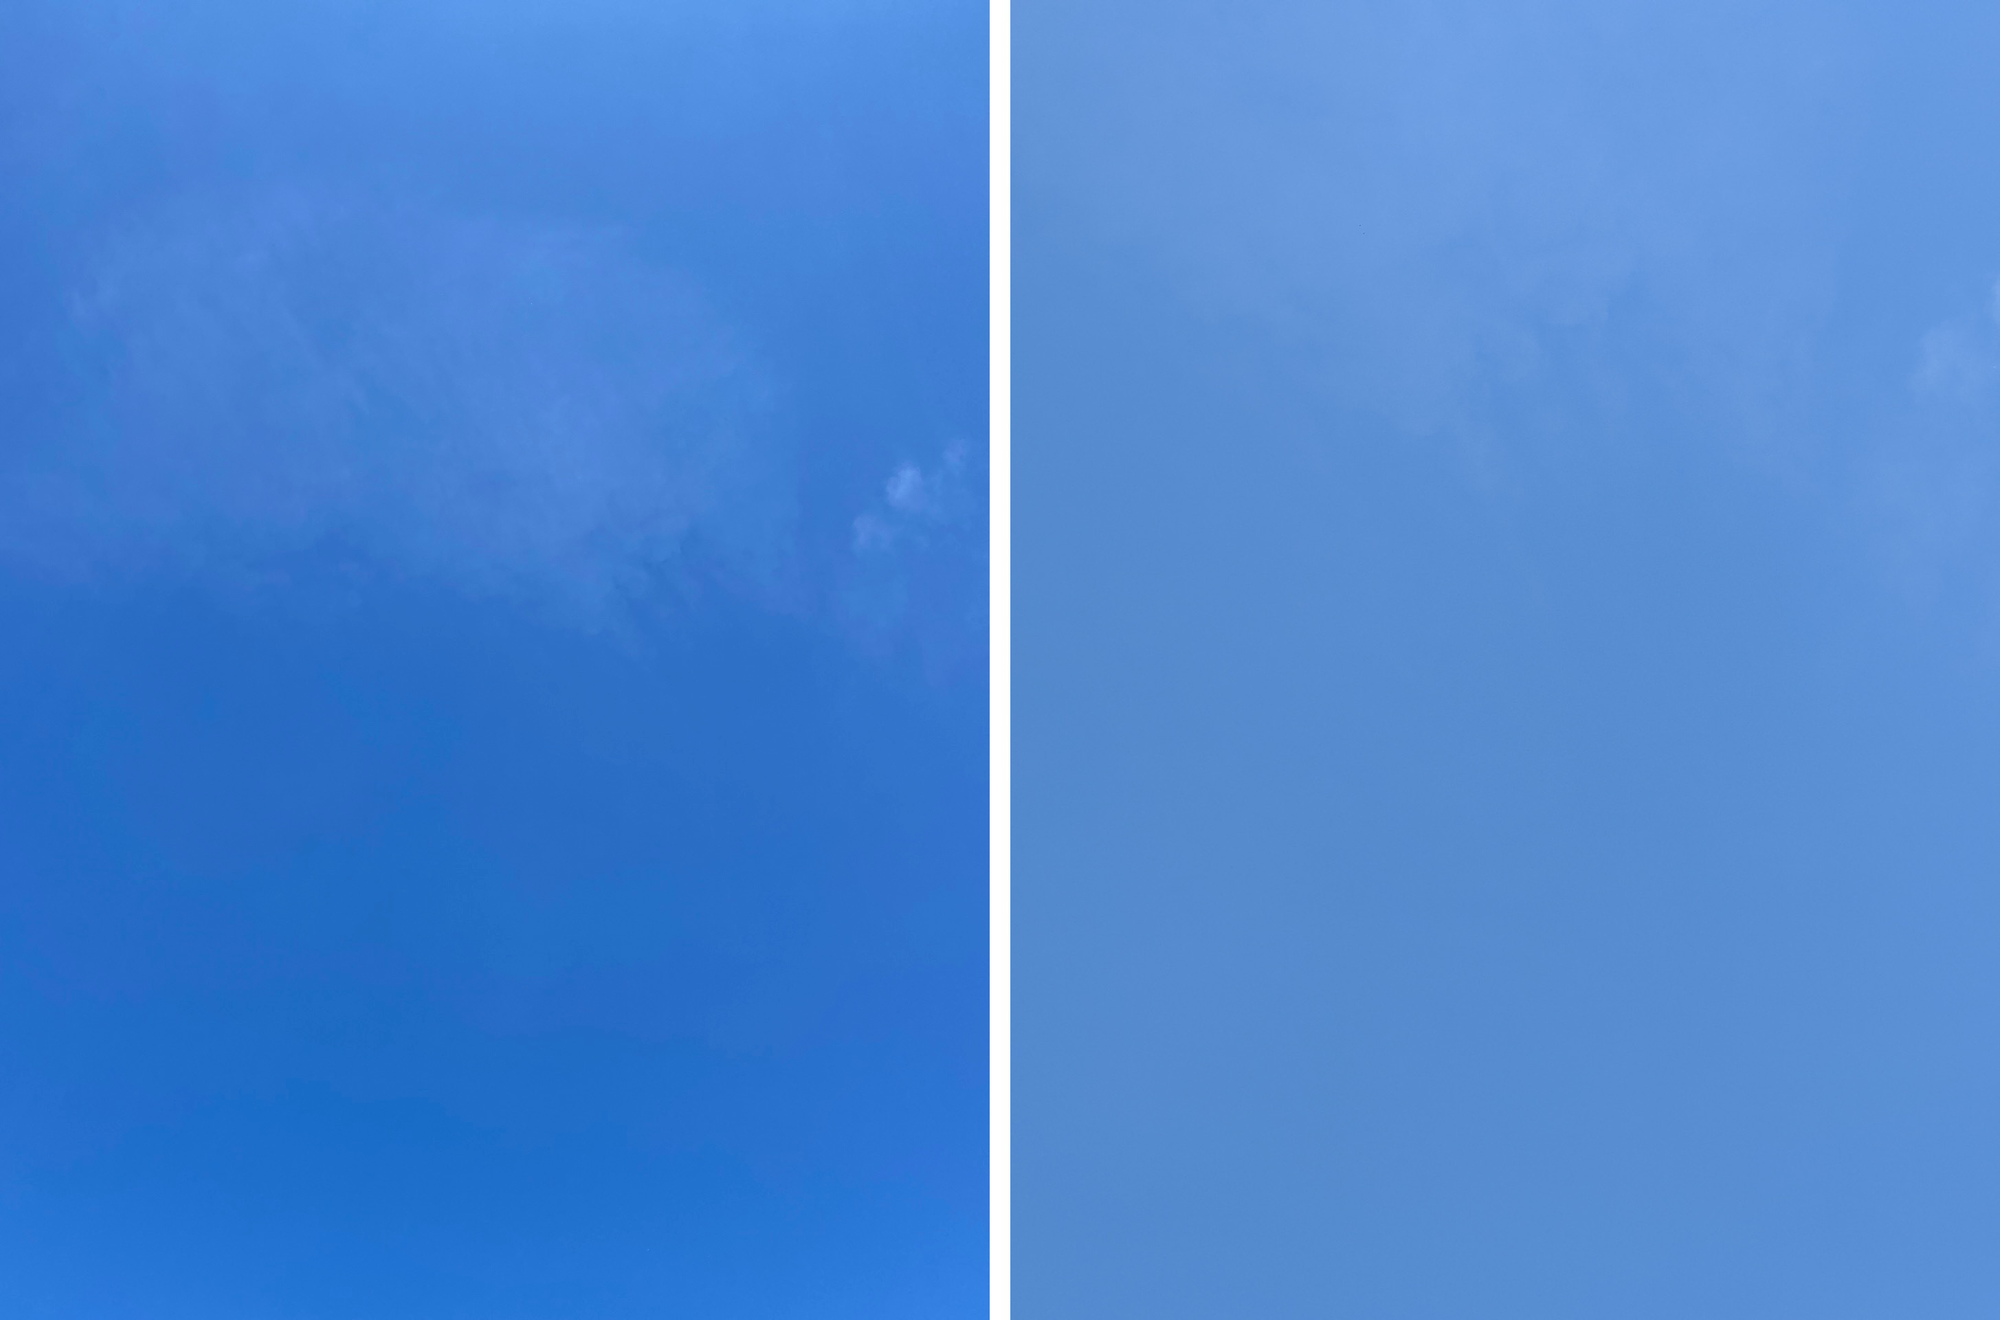 iPhone 11 Pro and Pixel 4 Cameras: Color temp, Color Quality, and Consistency Across Lenses